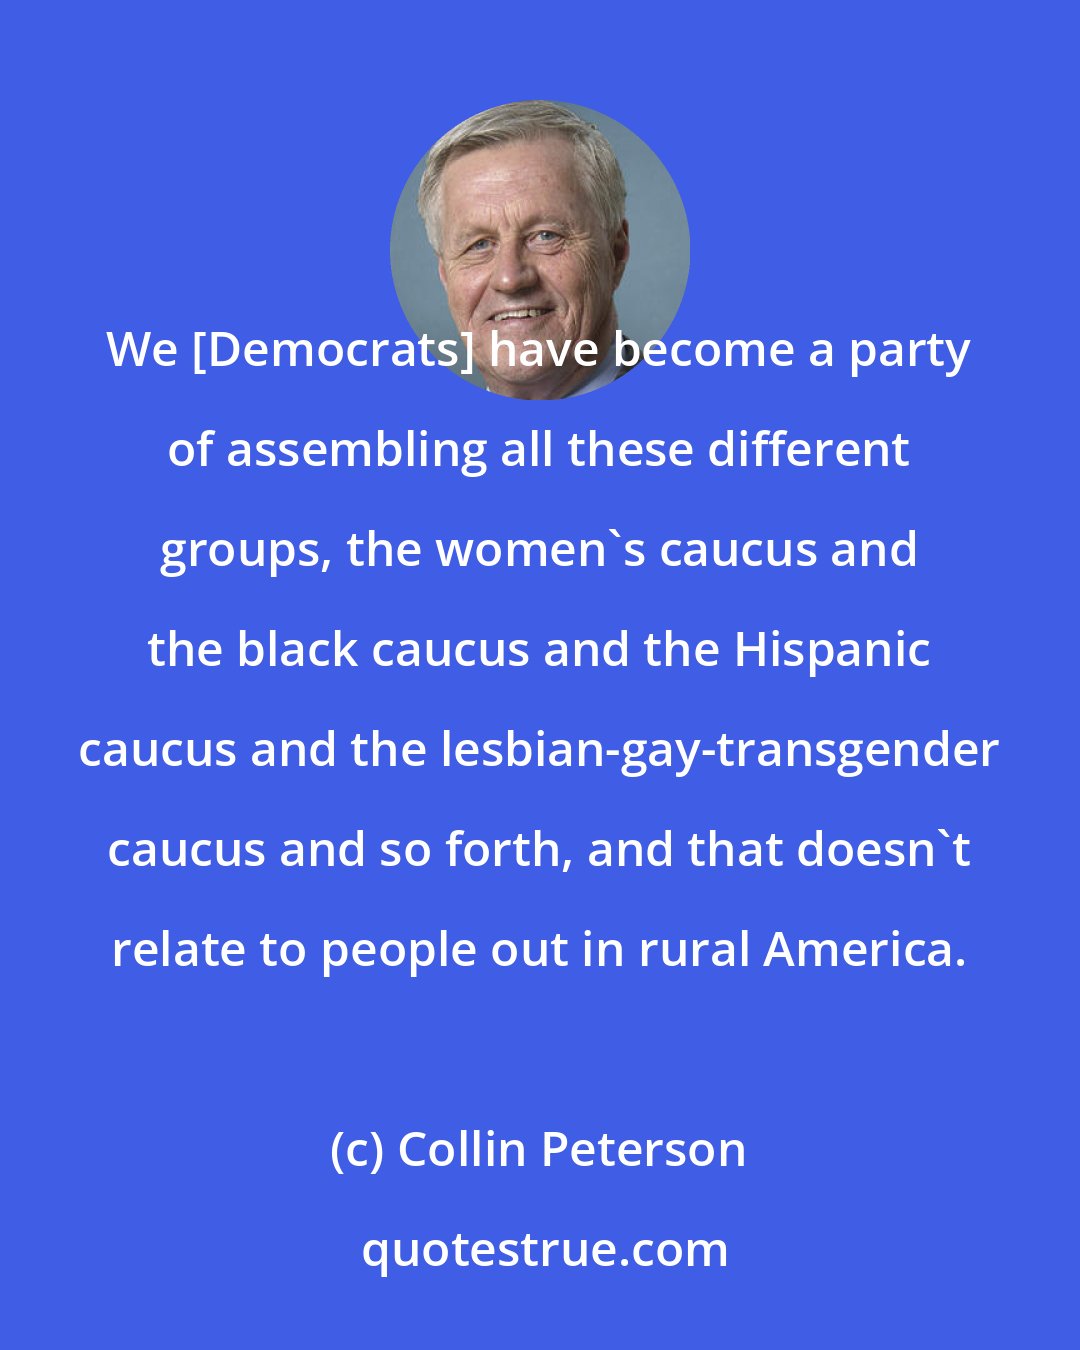 Collin Peterson: We [Democrats] have become a party of assembling all these different groups, the women's caucus and the black caucus and the Hispanic caucus and the lesbian-gay-transgender caucus and so forth, and that doesn't relate to people out in rural America.